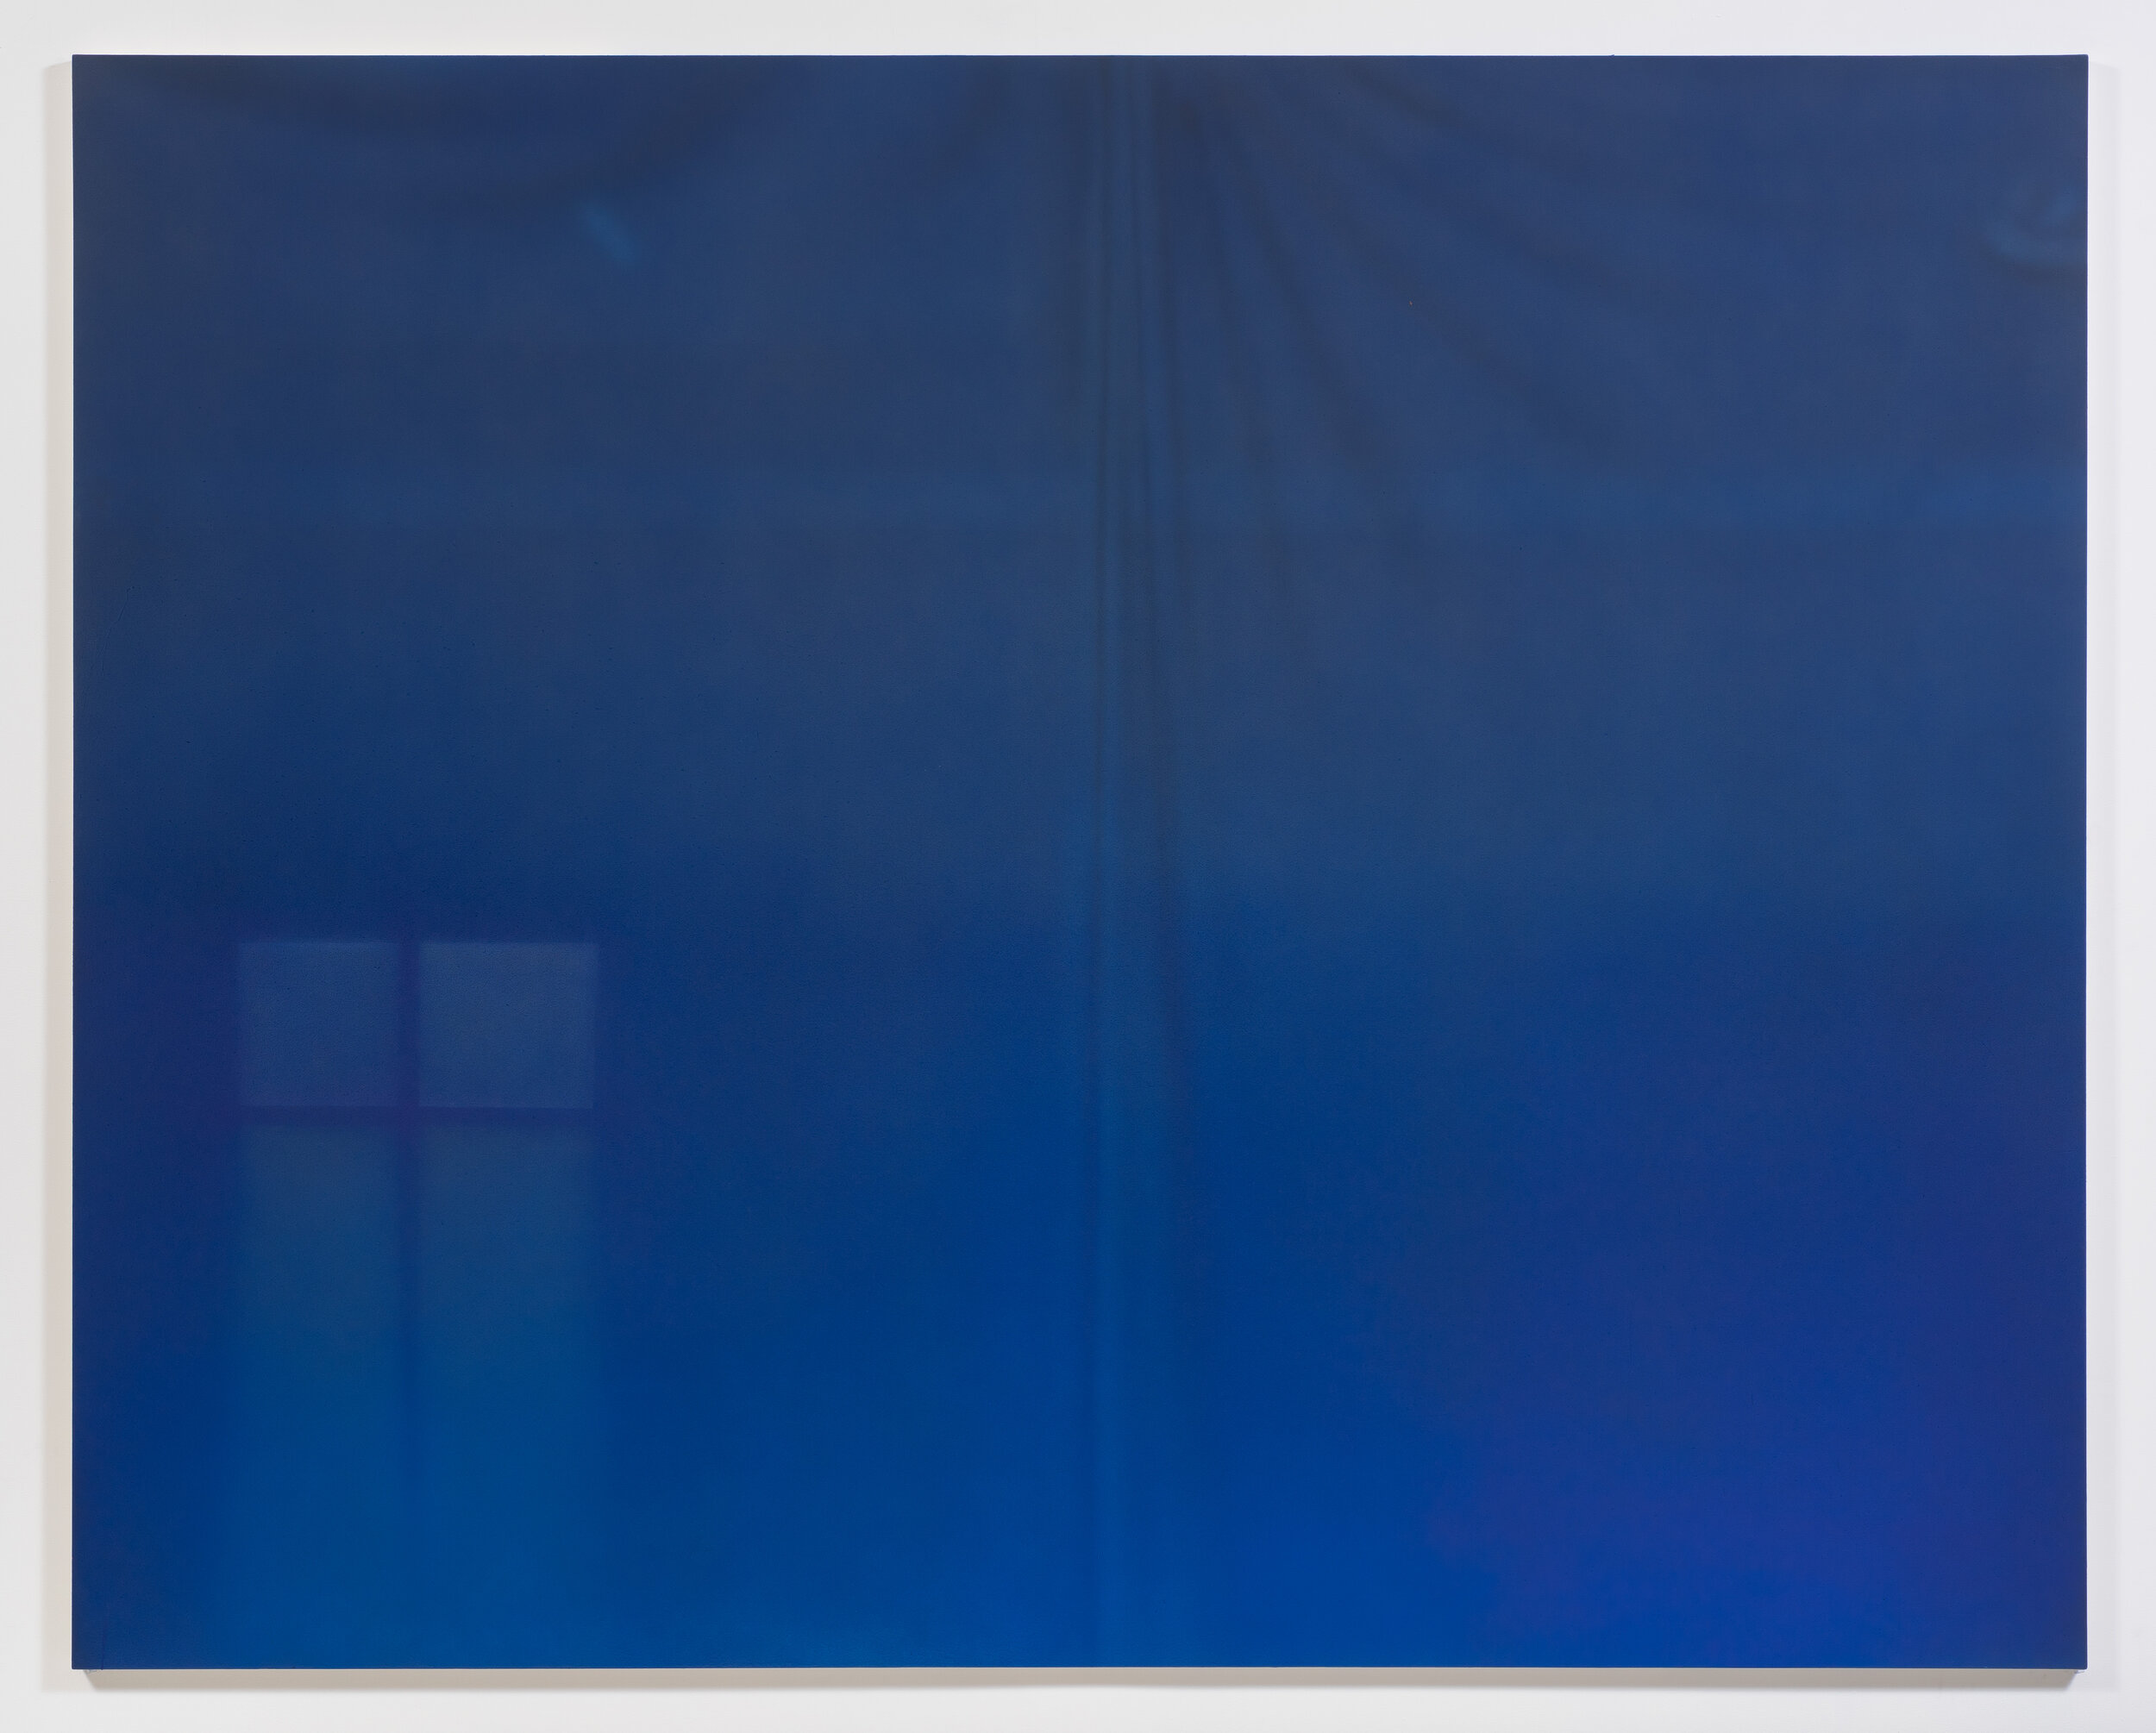   Untitled Painting in Dark Blue over Cerulean , 2014. Acrylic on canvas. 96 x 120 inches 